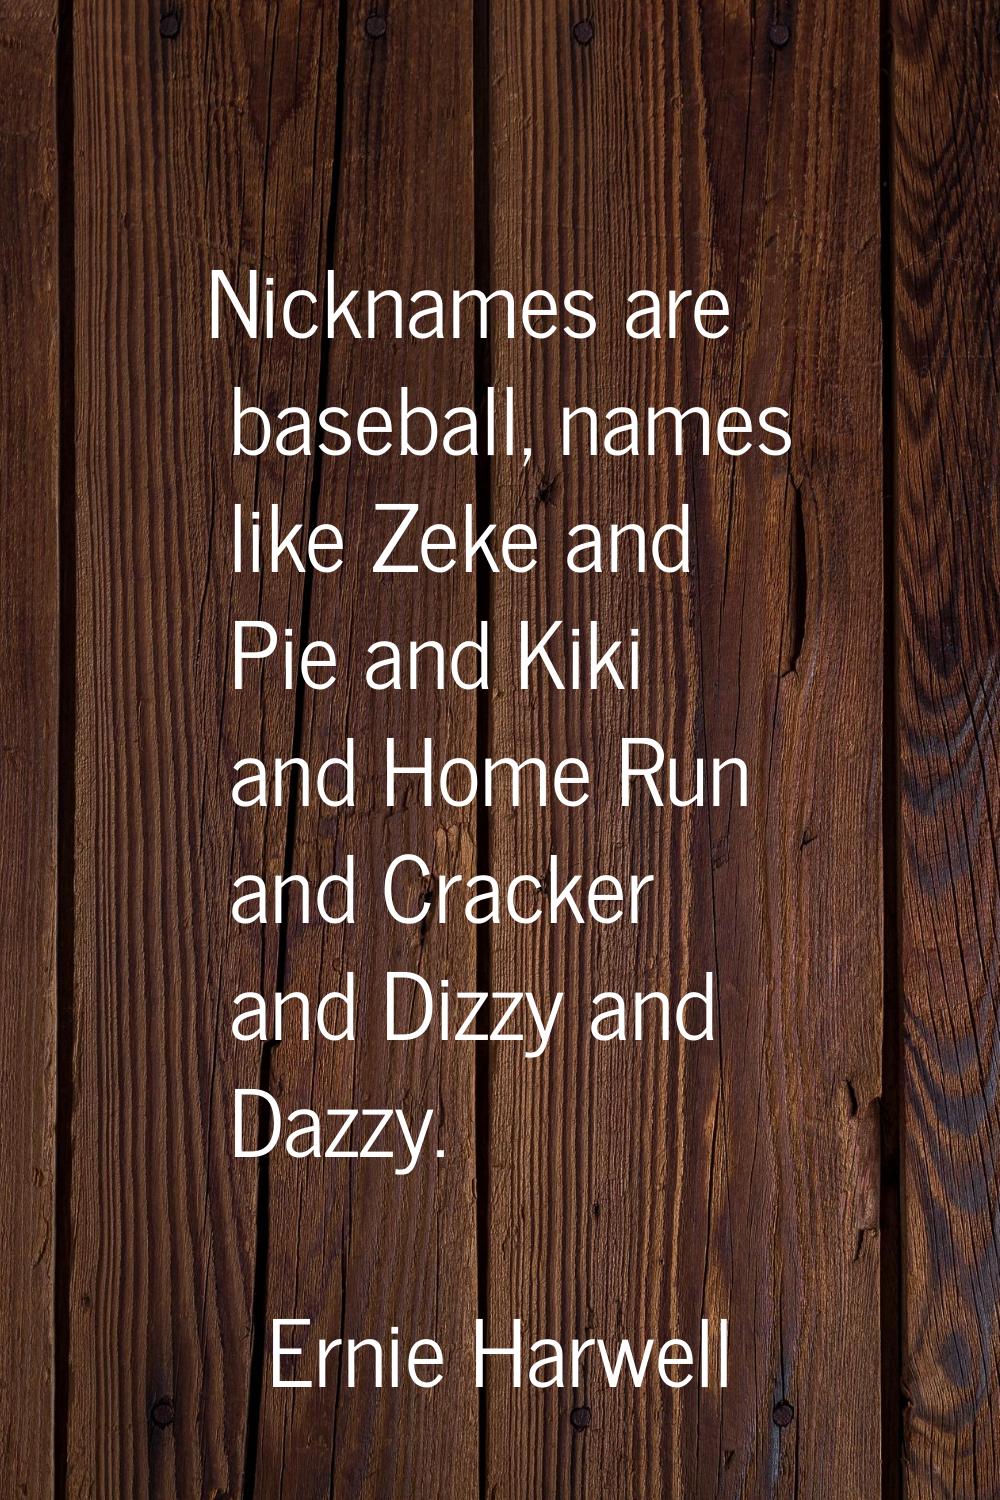 Nicknames are baseball, names like Zeke and Pie and Kiki and Home Run and Cracker and Dizzy and Daz